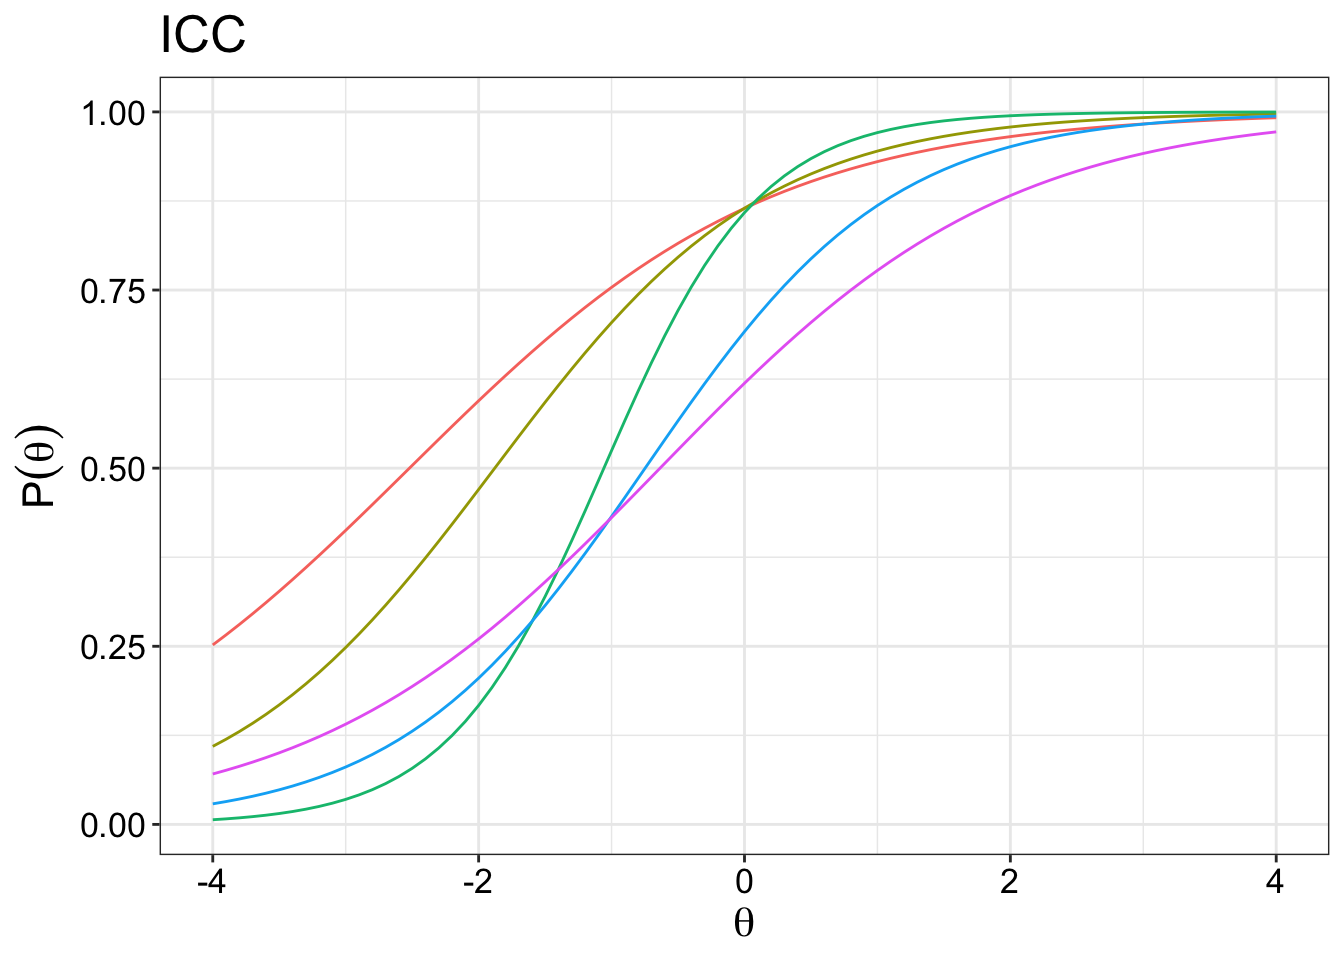 A more discriminative item was represented by (a) a steeper slope curve